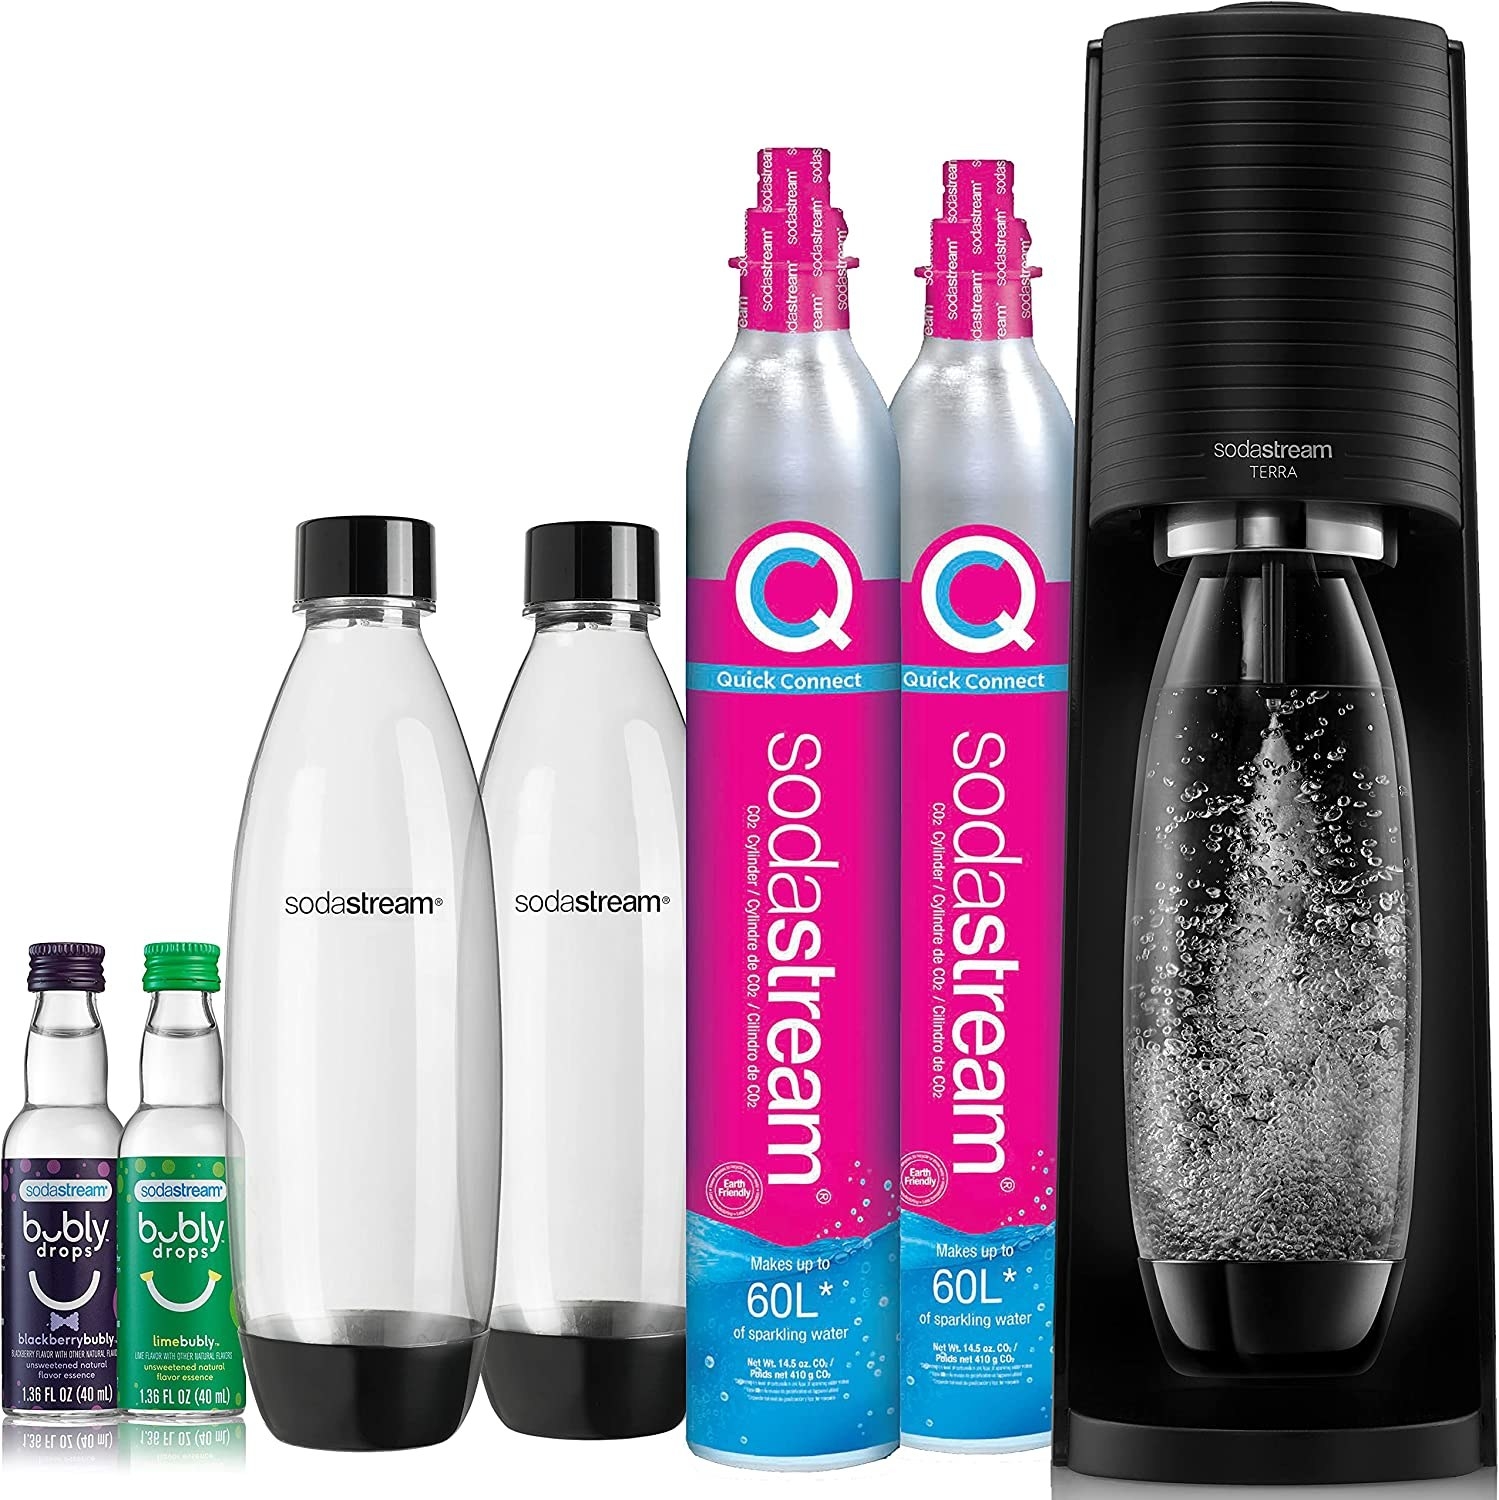 Black SodaStream machine with CO2 cylinders, bottles, and flavor additives